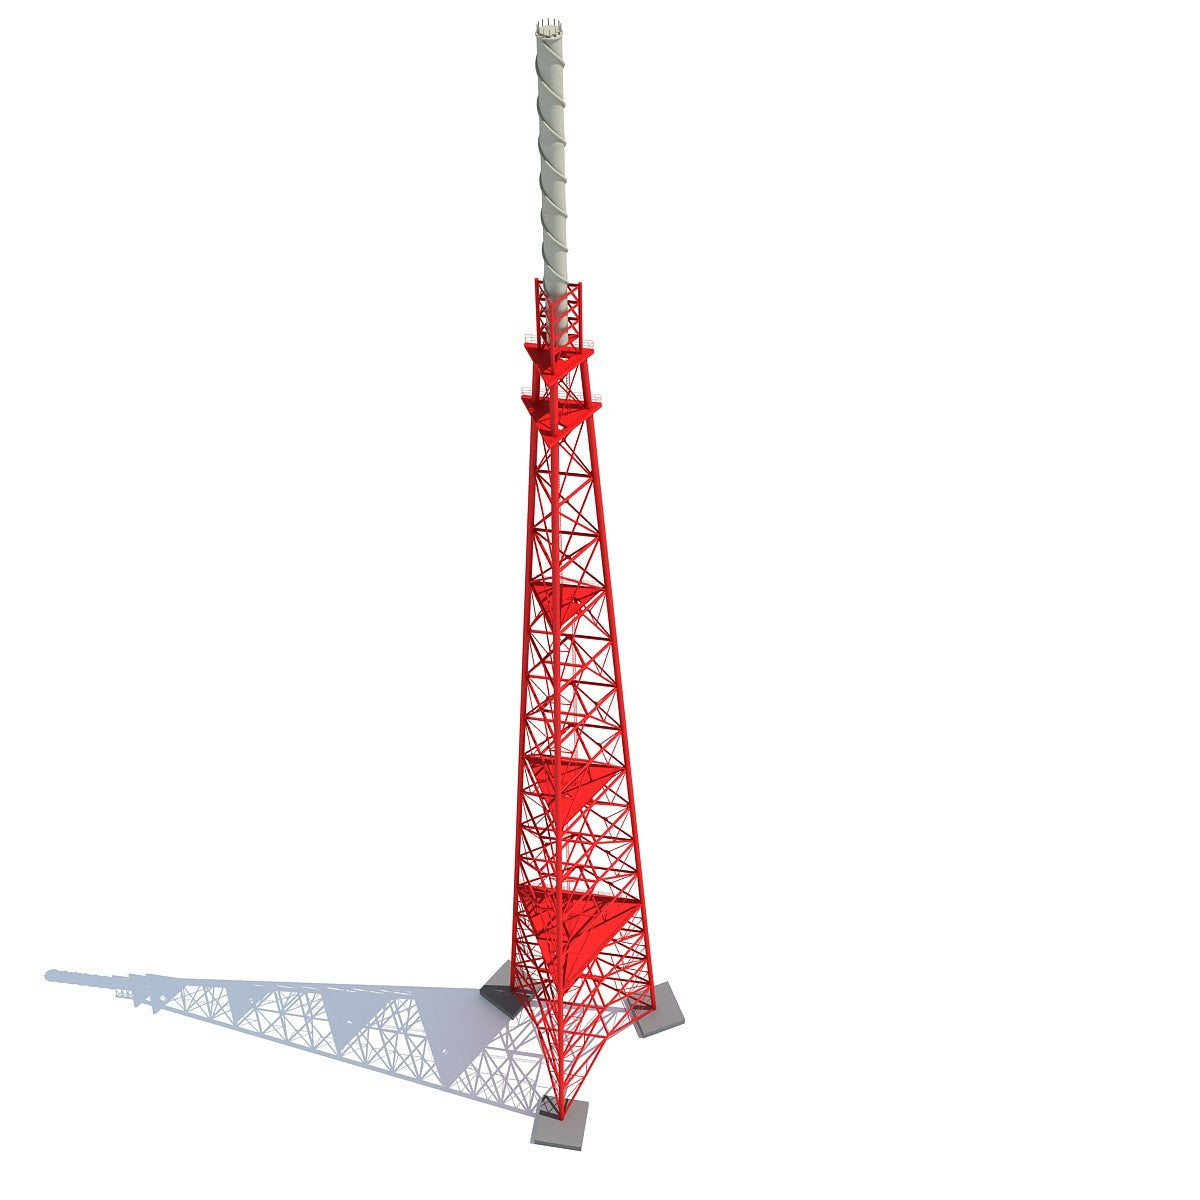 3D Industrial Tower